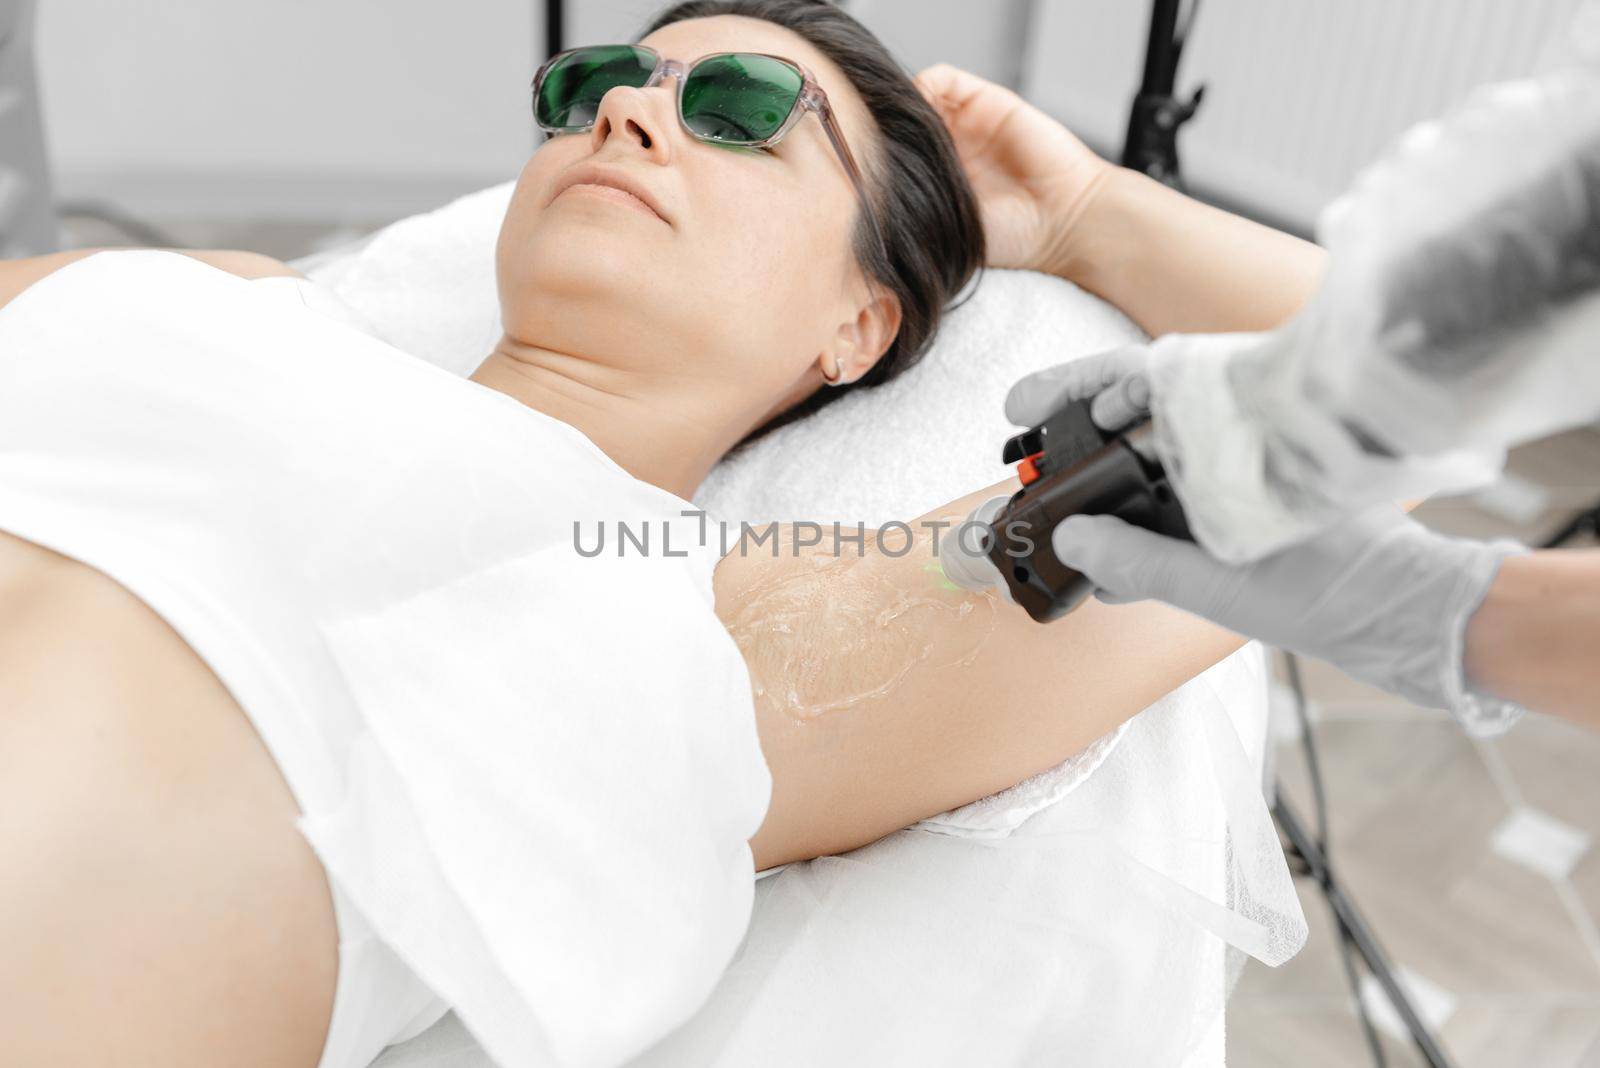 Laser hair removal process. Woman during laser hair removal of armpits and underarms in beauty center. Laser hair removal concept. by gulyaevstudio